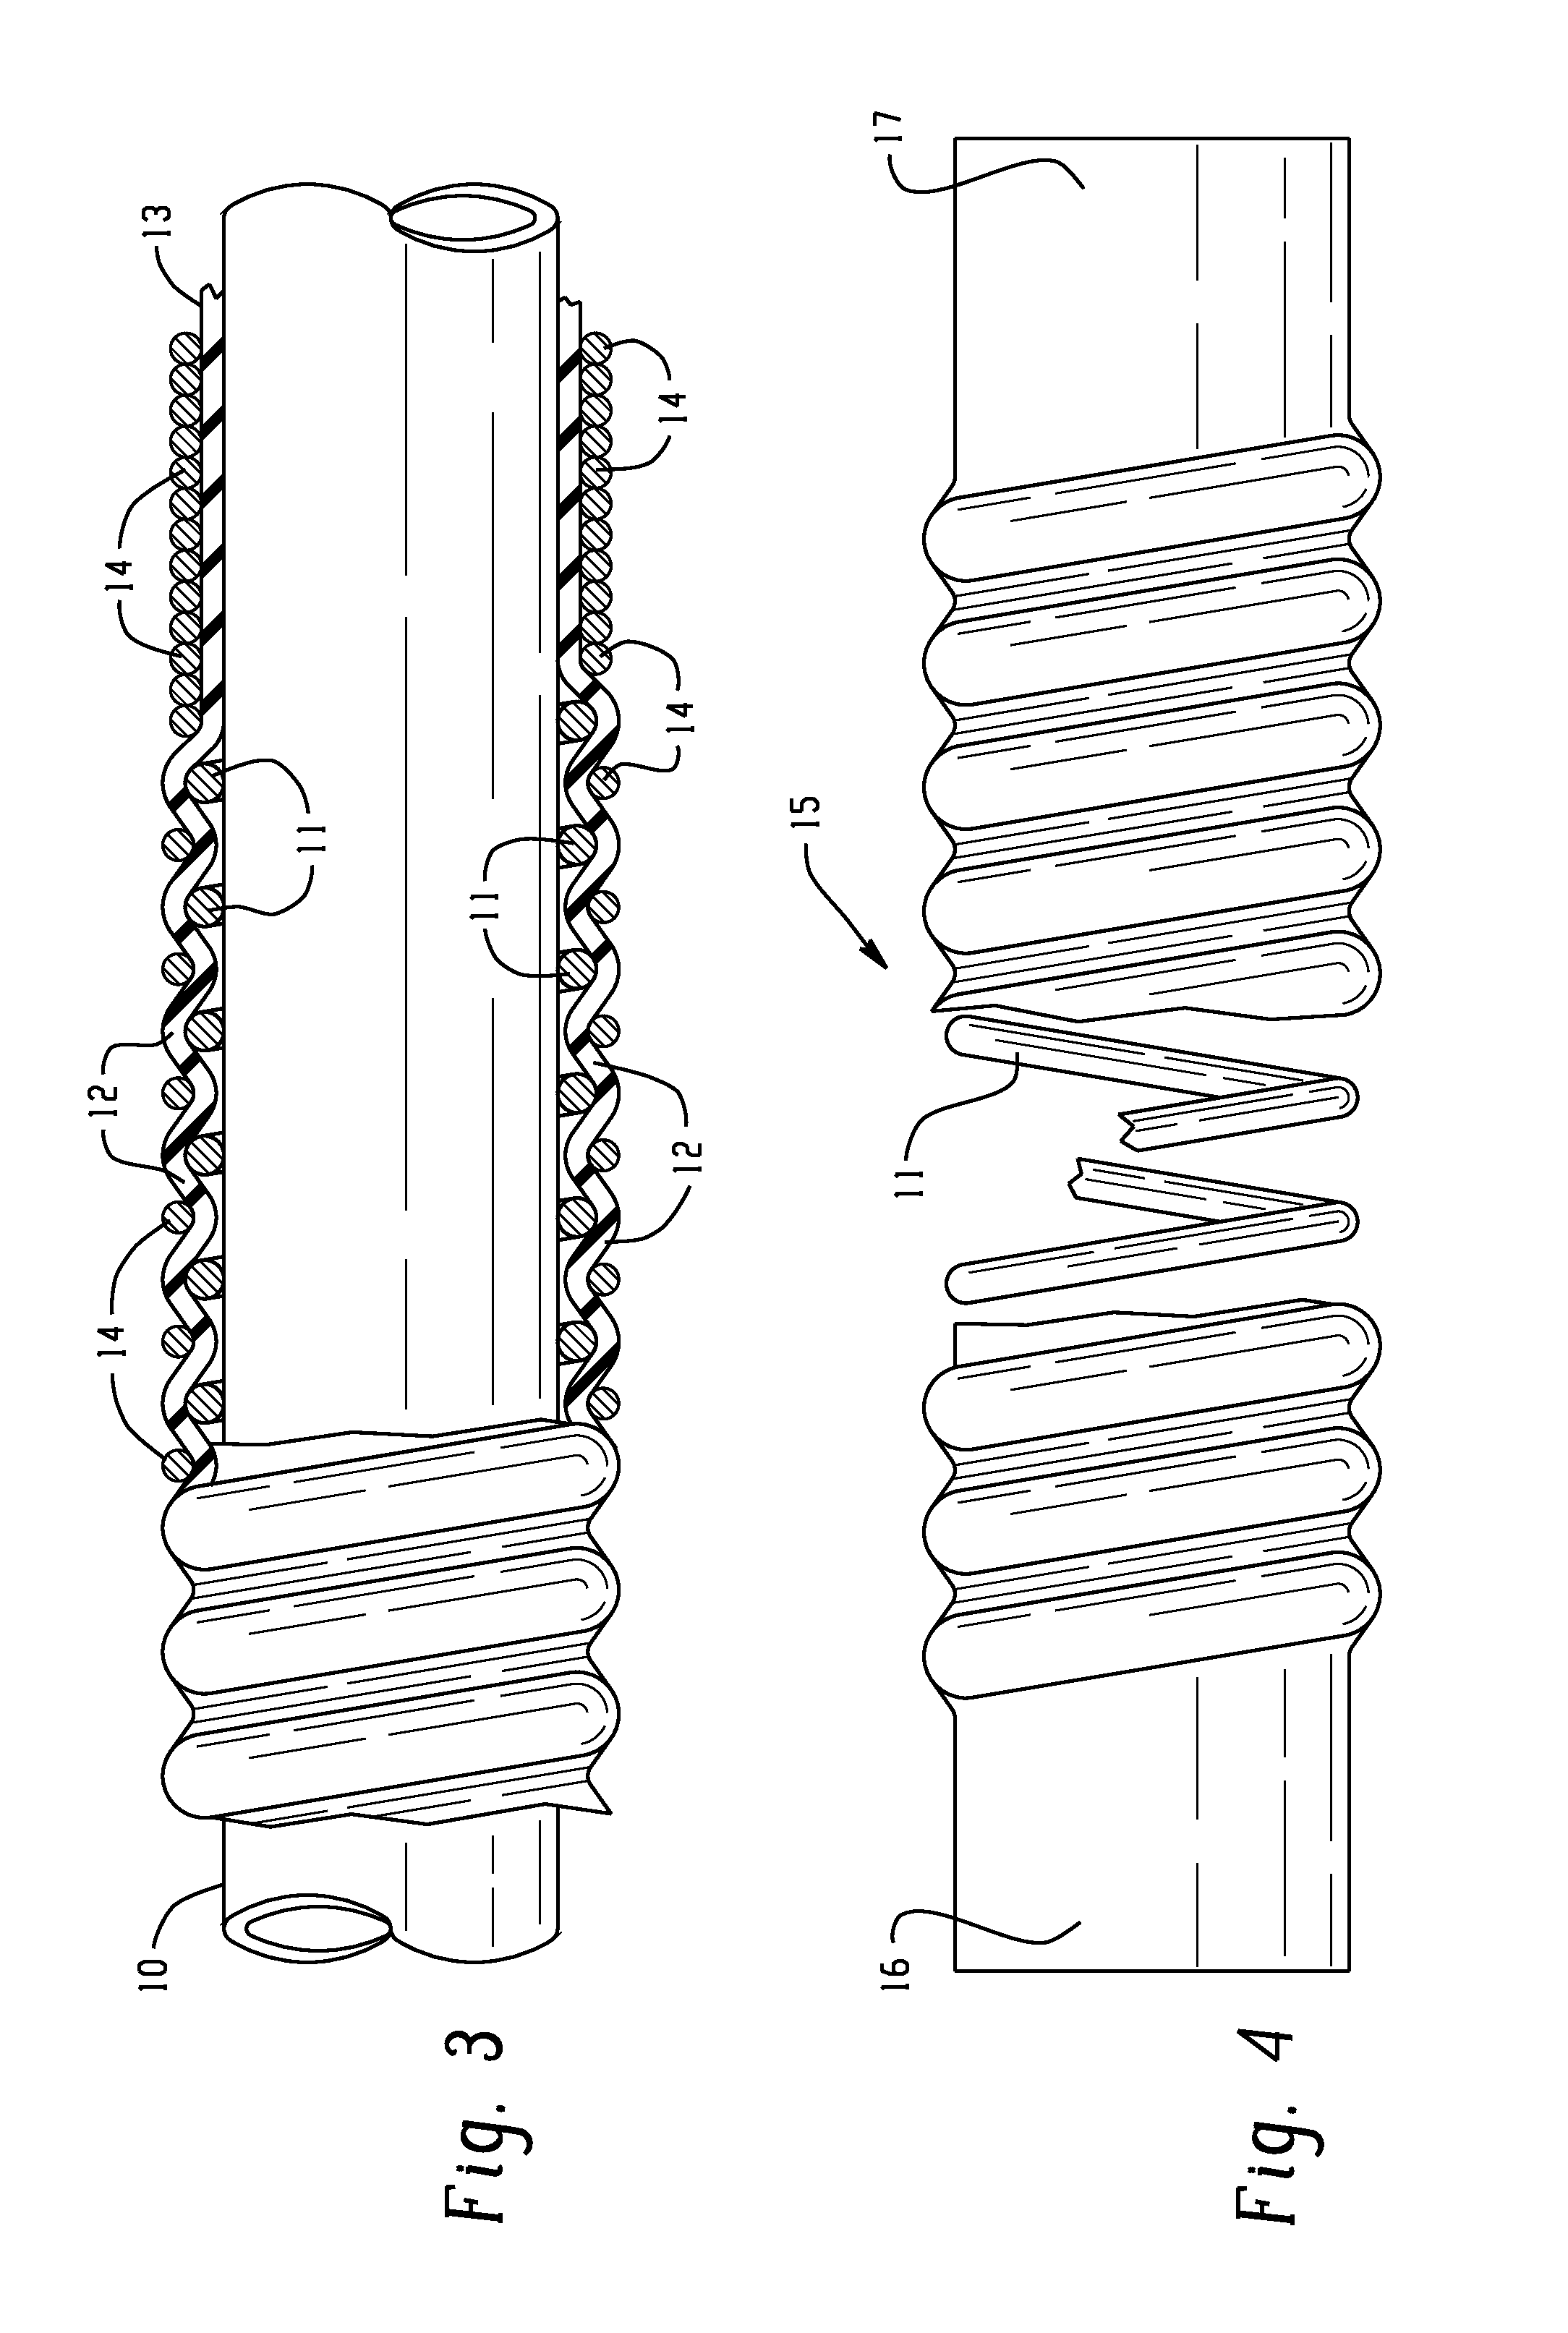 Reinforced flexible tubing and method of making same